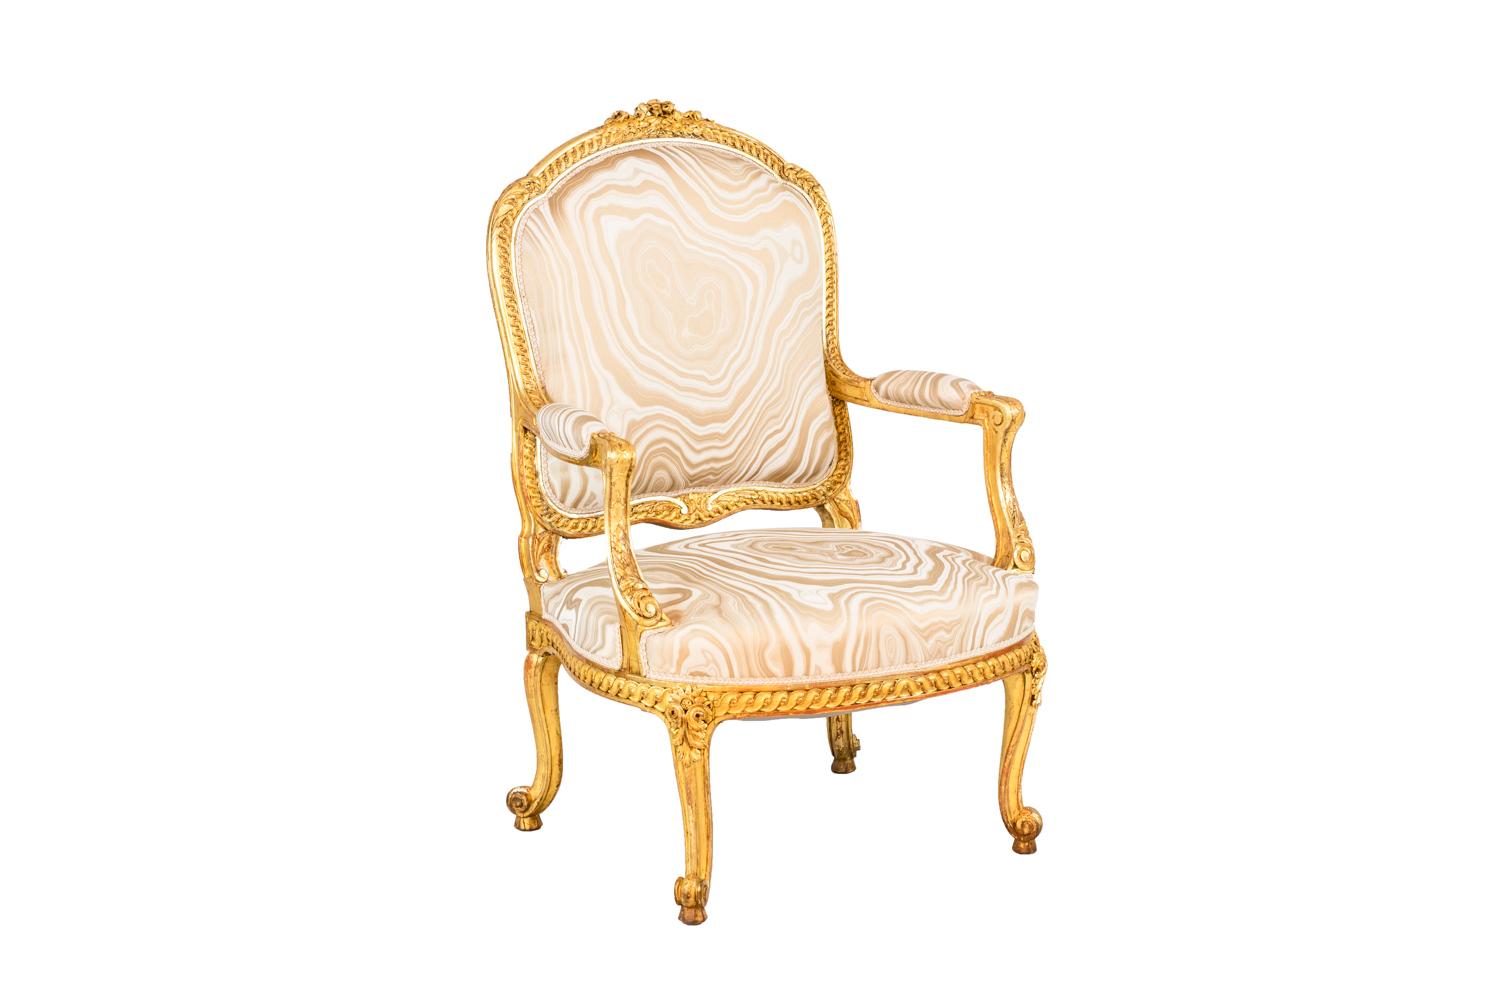 Pair of Transition style armchairs in giltwood standing on four cabriole legs ending in scroll with a decor of acanthus leaves. Slightly bulged apron adorned with an interlacing frieze. Arm supports slightly behind the leg line adorned with acanthus